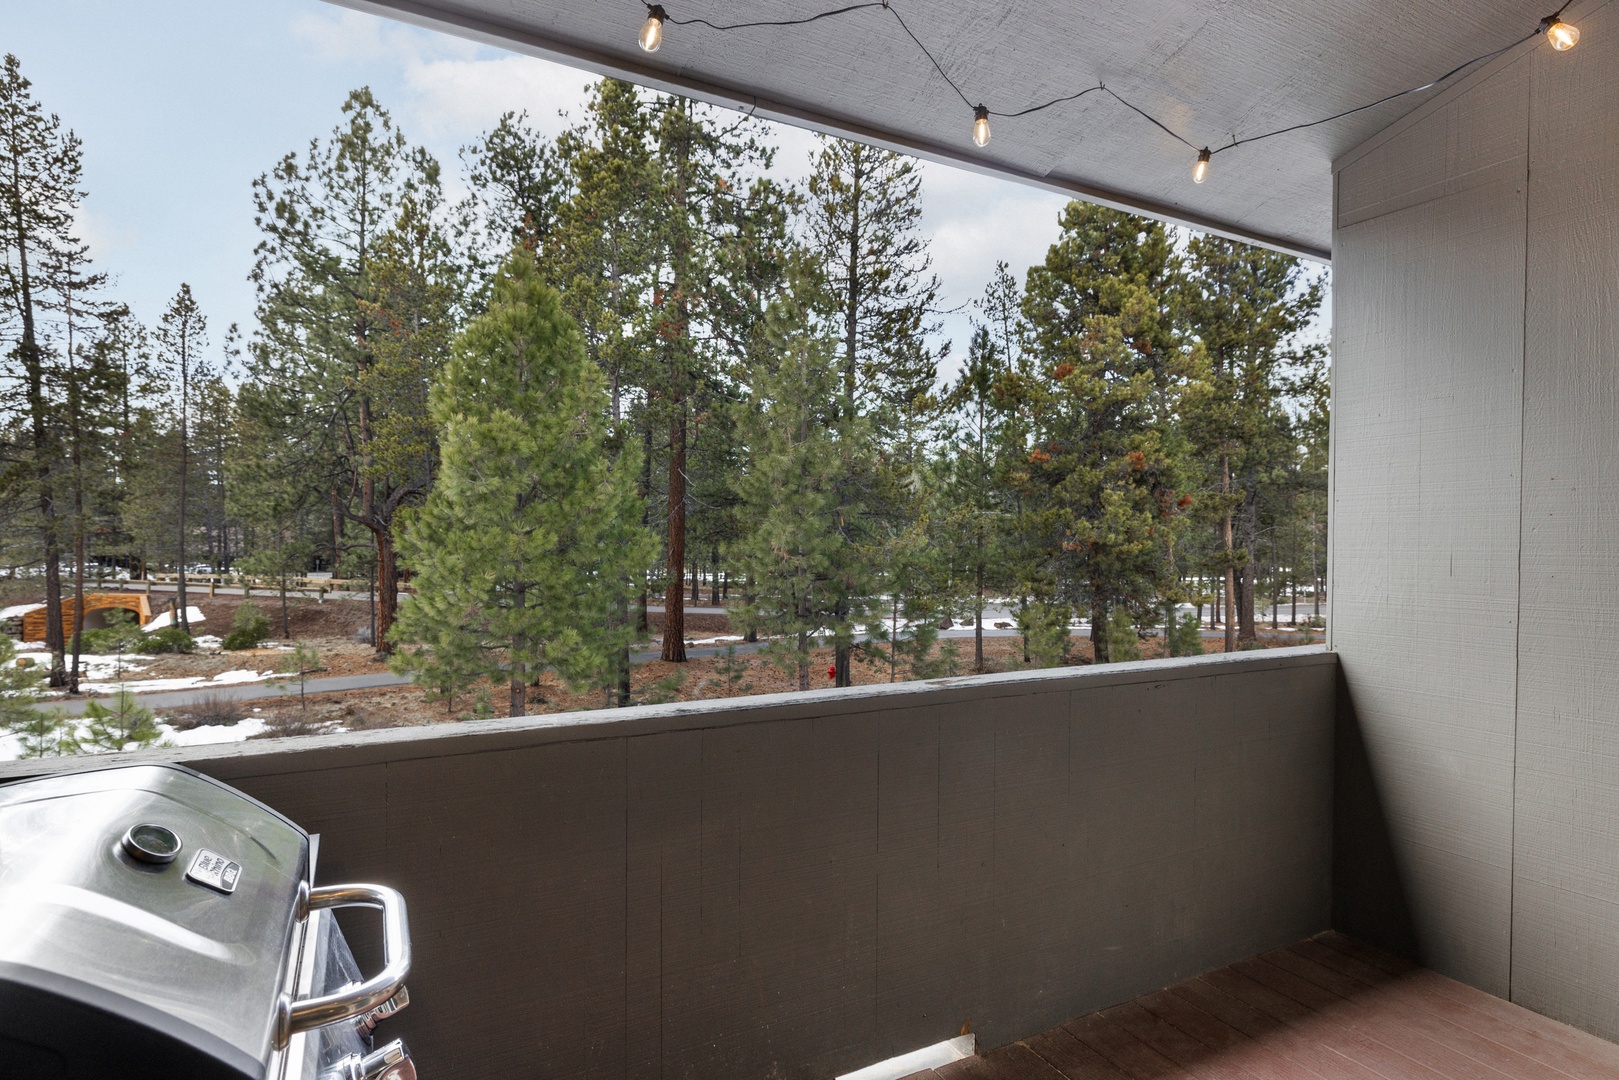 Take in the fresh air on the balcony while you grill up a feast!